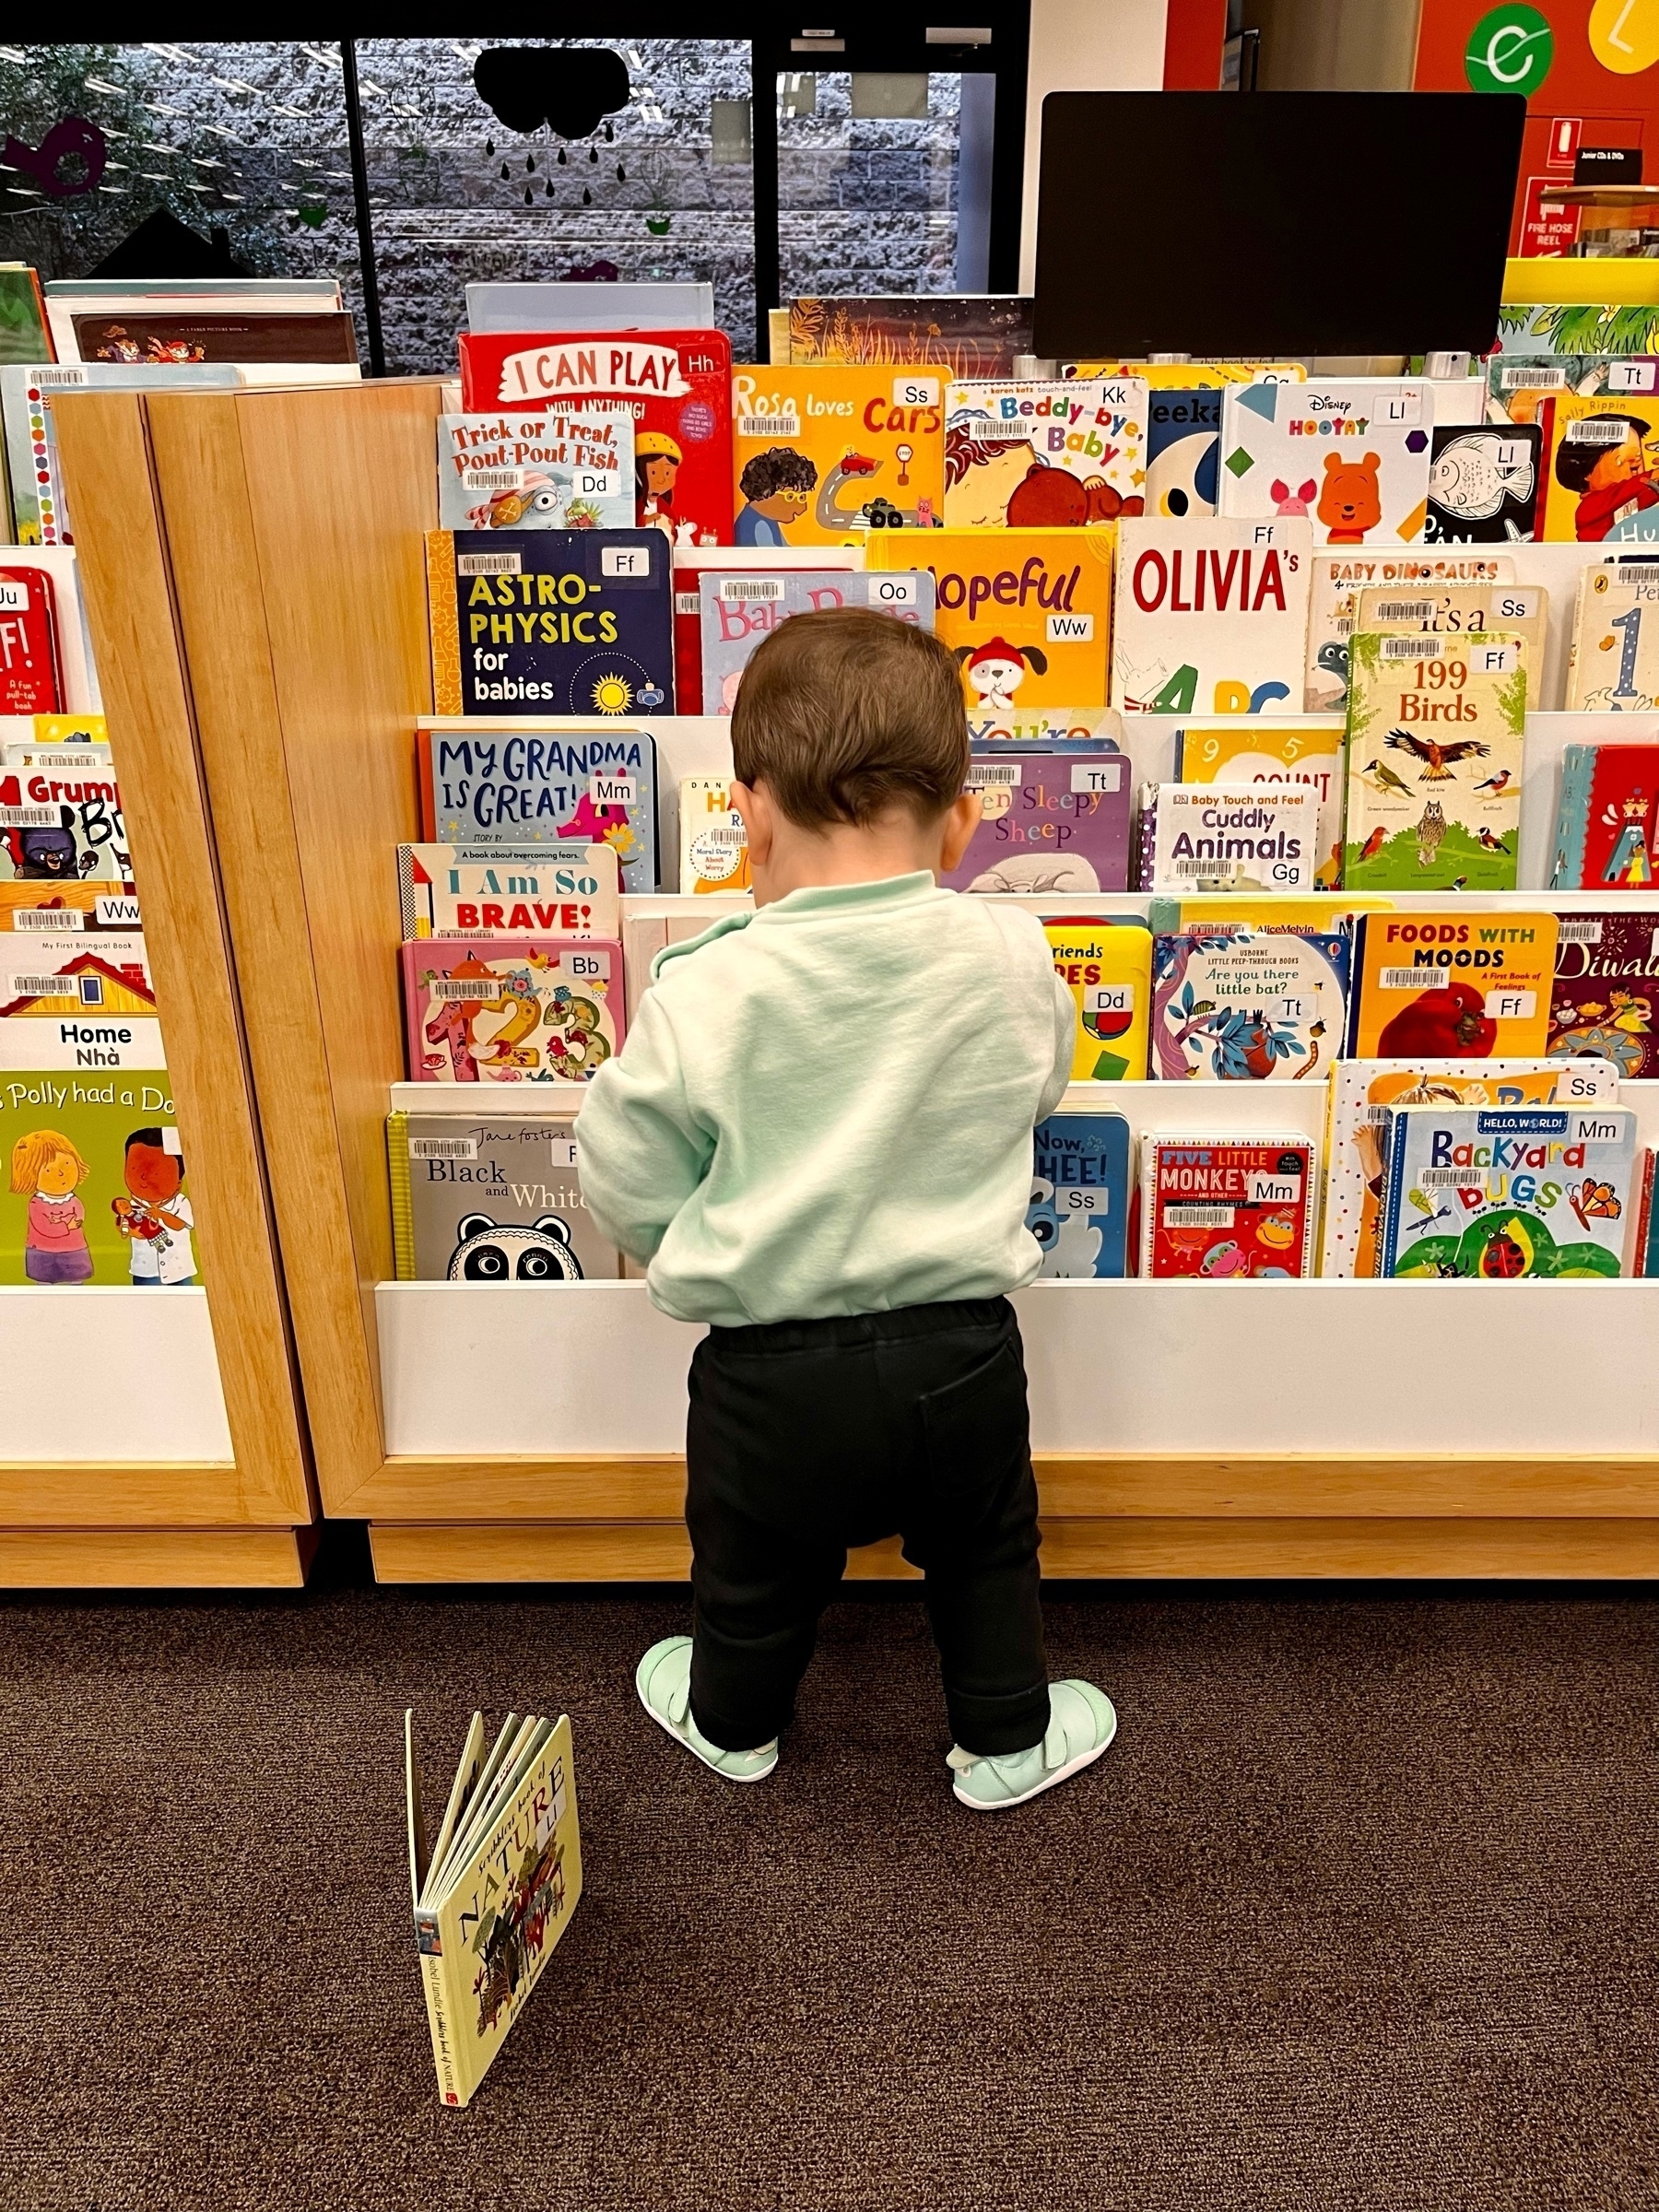 A baby exploring a kids' bookshelf at a library